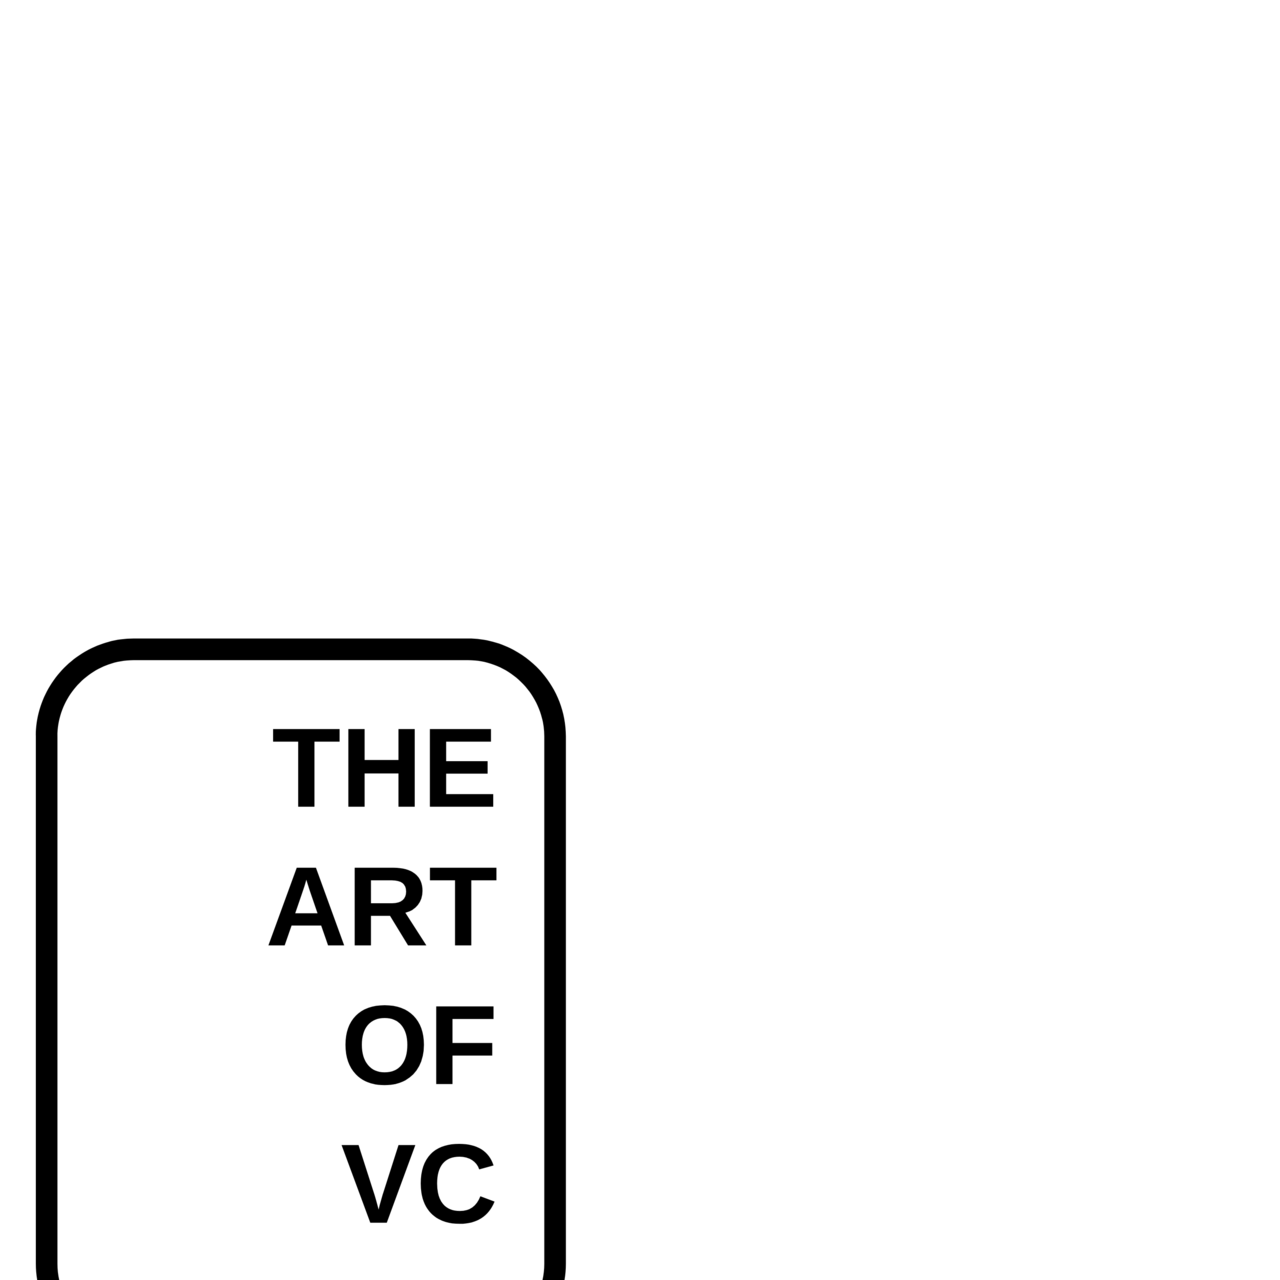 The Art of VC